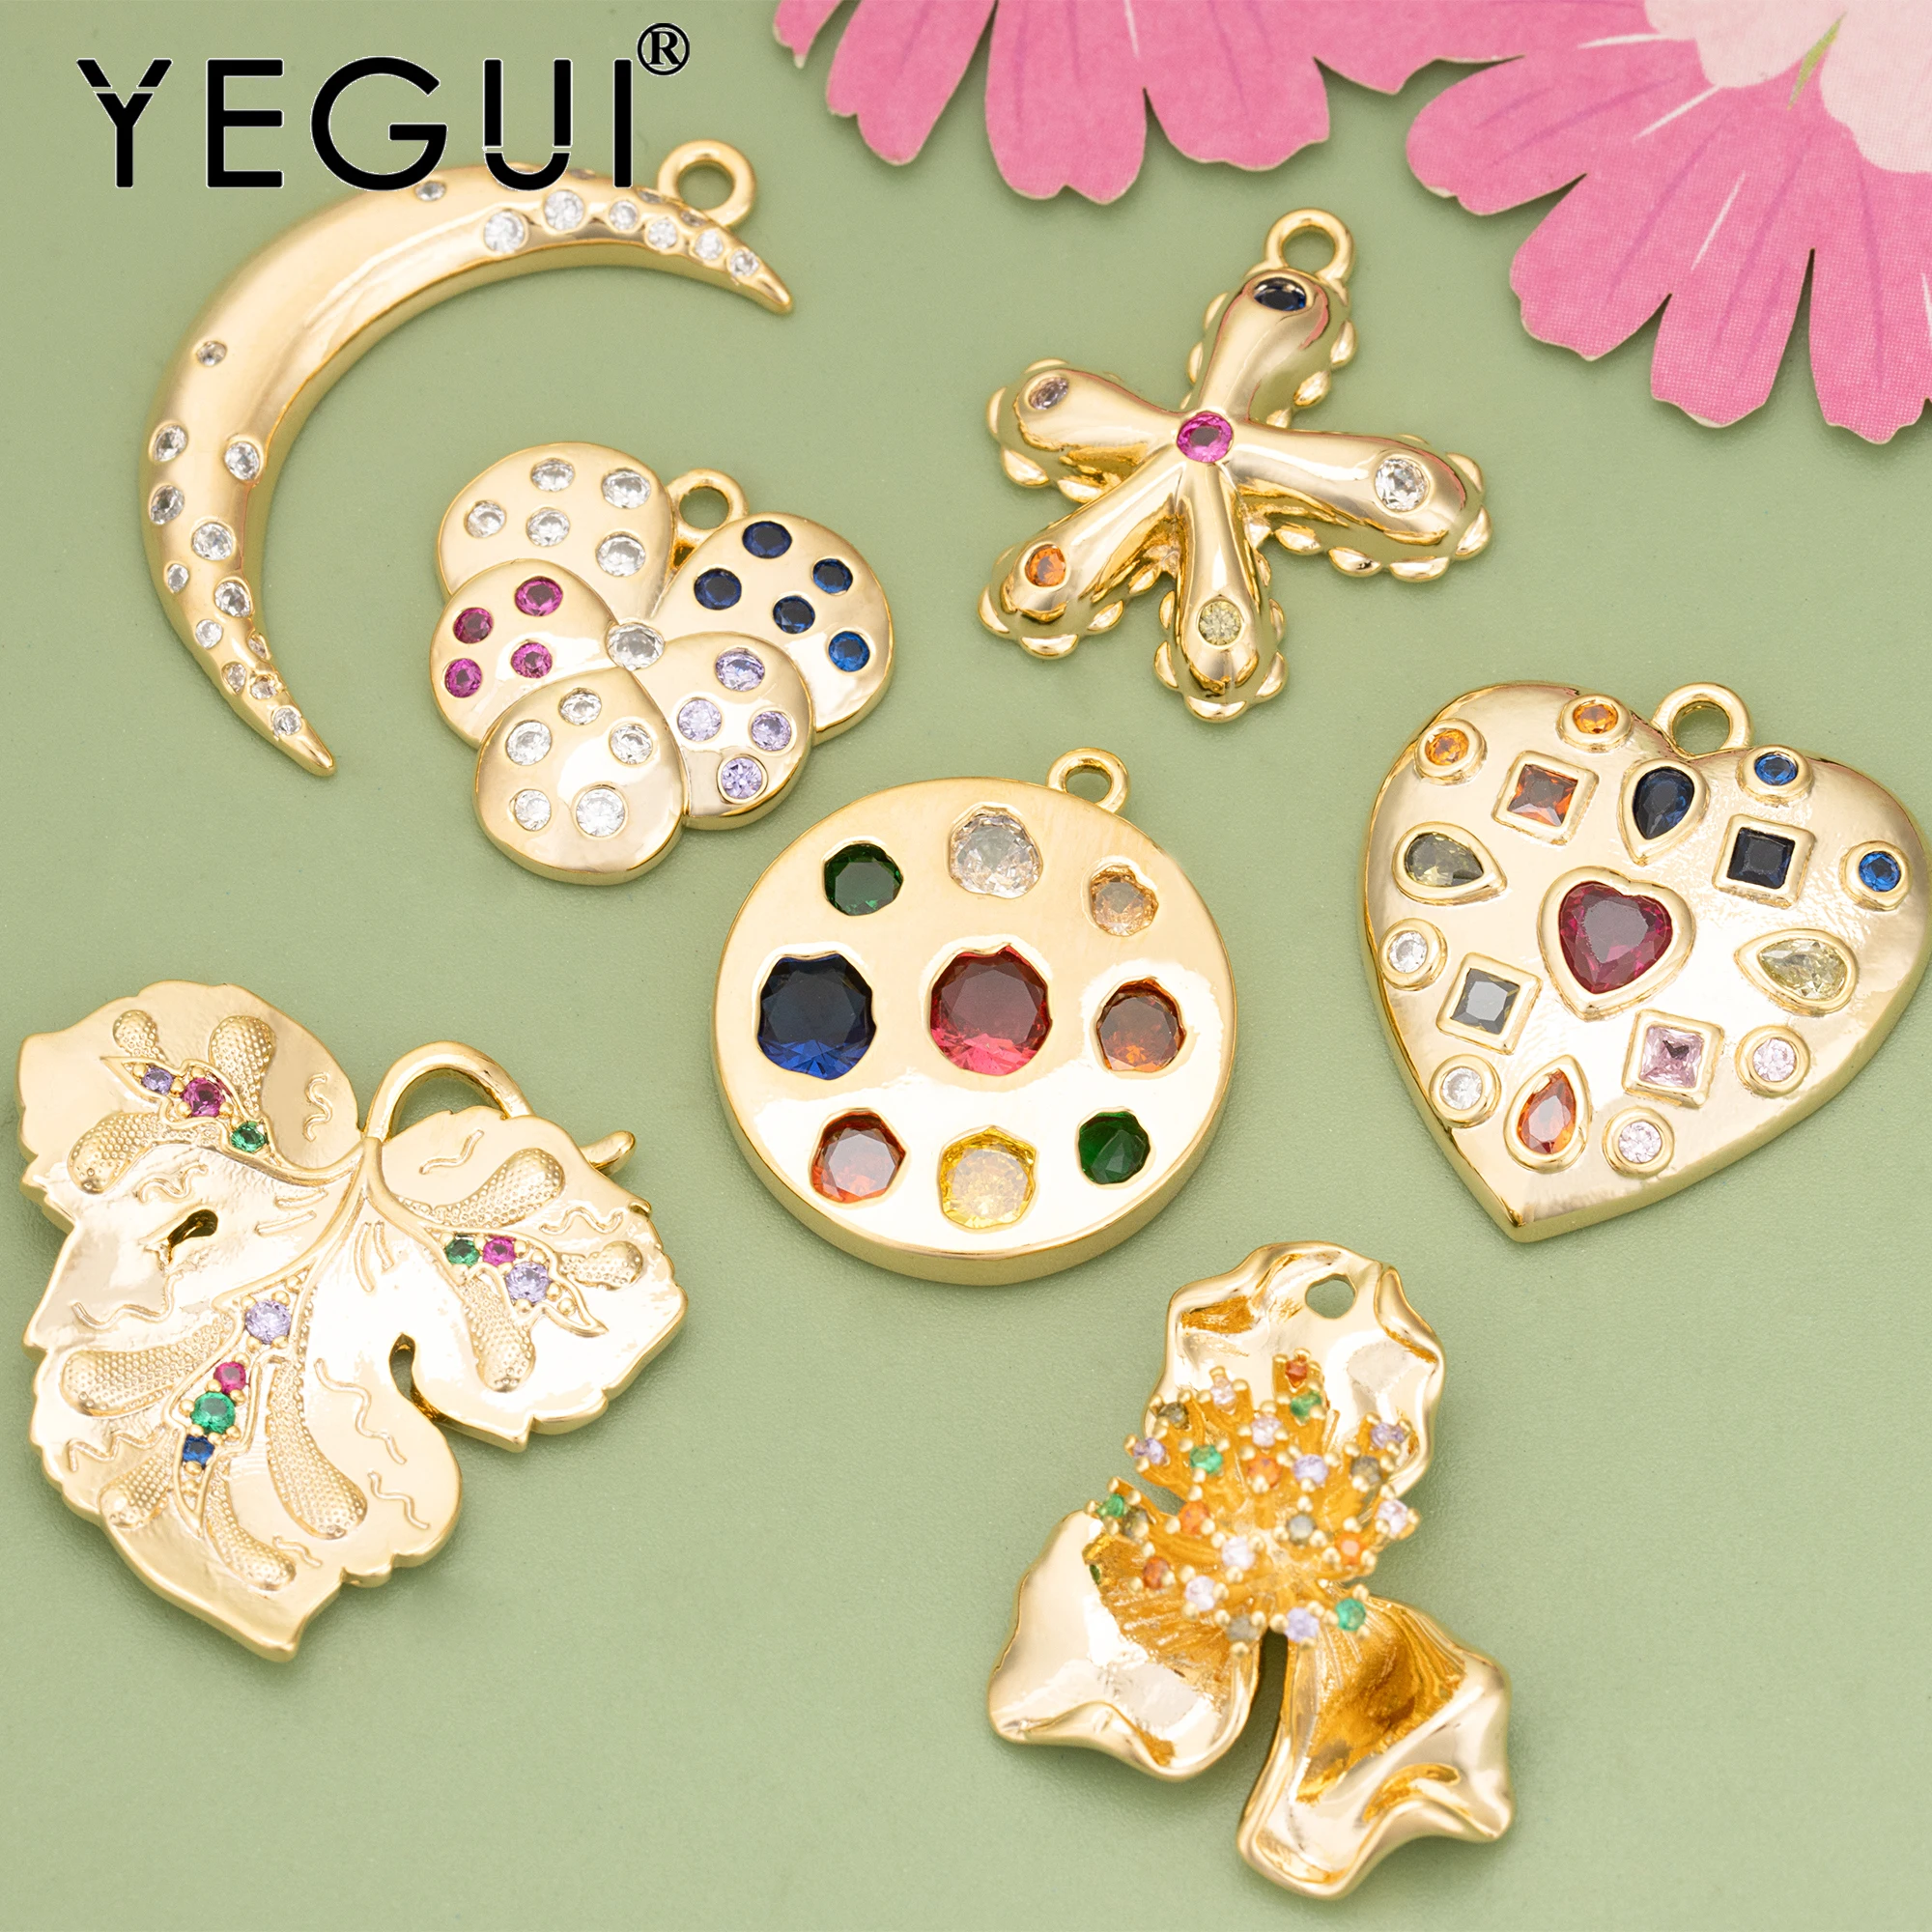 

YEGUI ME37,jewelry accessories,18k gold rhodium plated,copper,zircons,hand made,charms,diy pendants,jewelry making,4pcs/lot